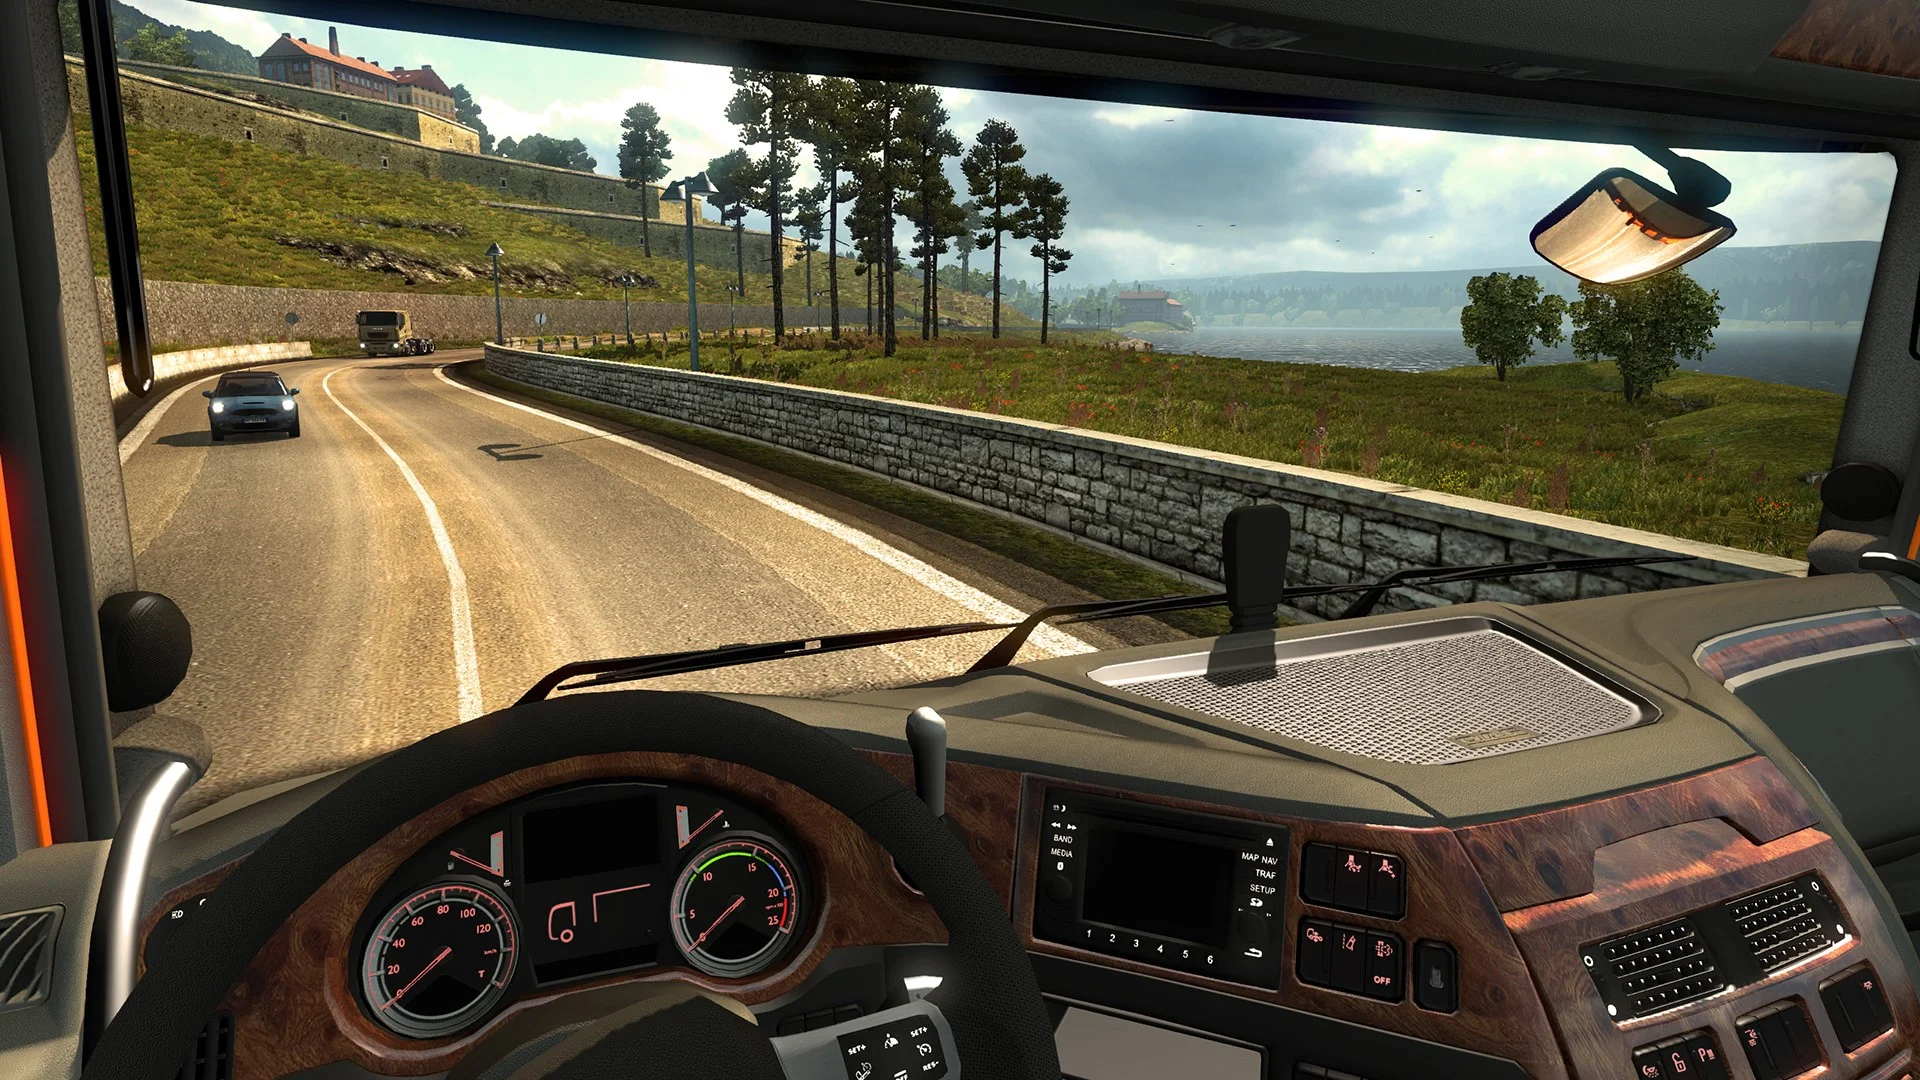 A set of screenshots from the West Balkans DLC for Euro Truck Simulator 2 demonstrates the new cargo available for transportation